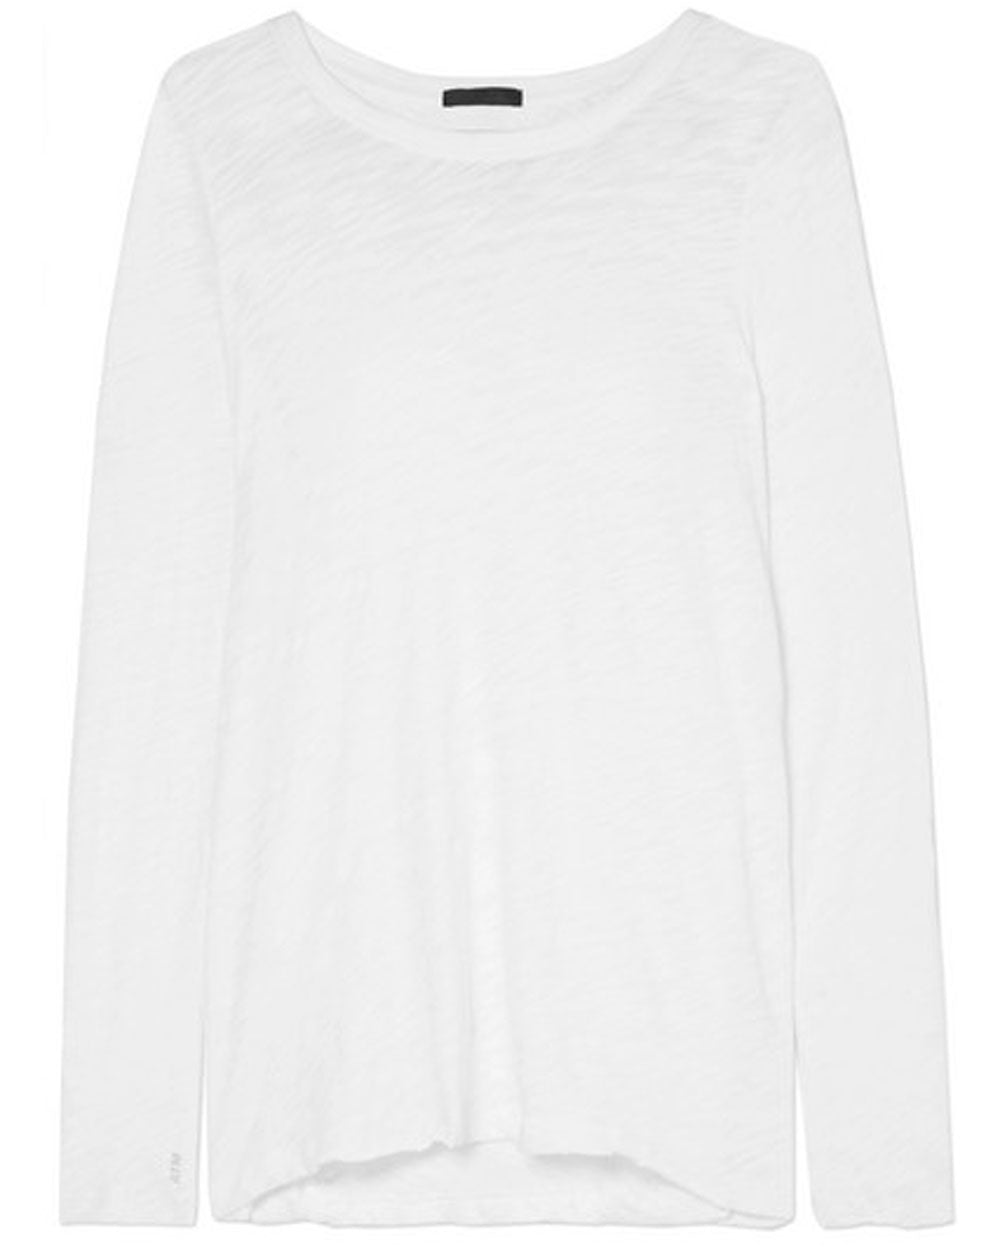 White Destroyed Jersey Long Sleeve Tee